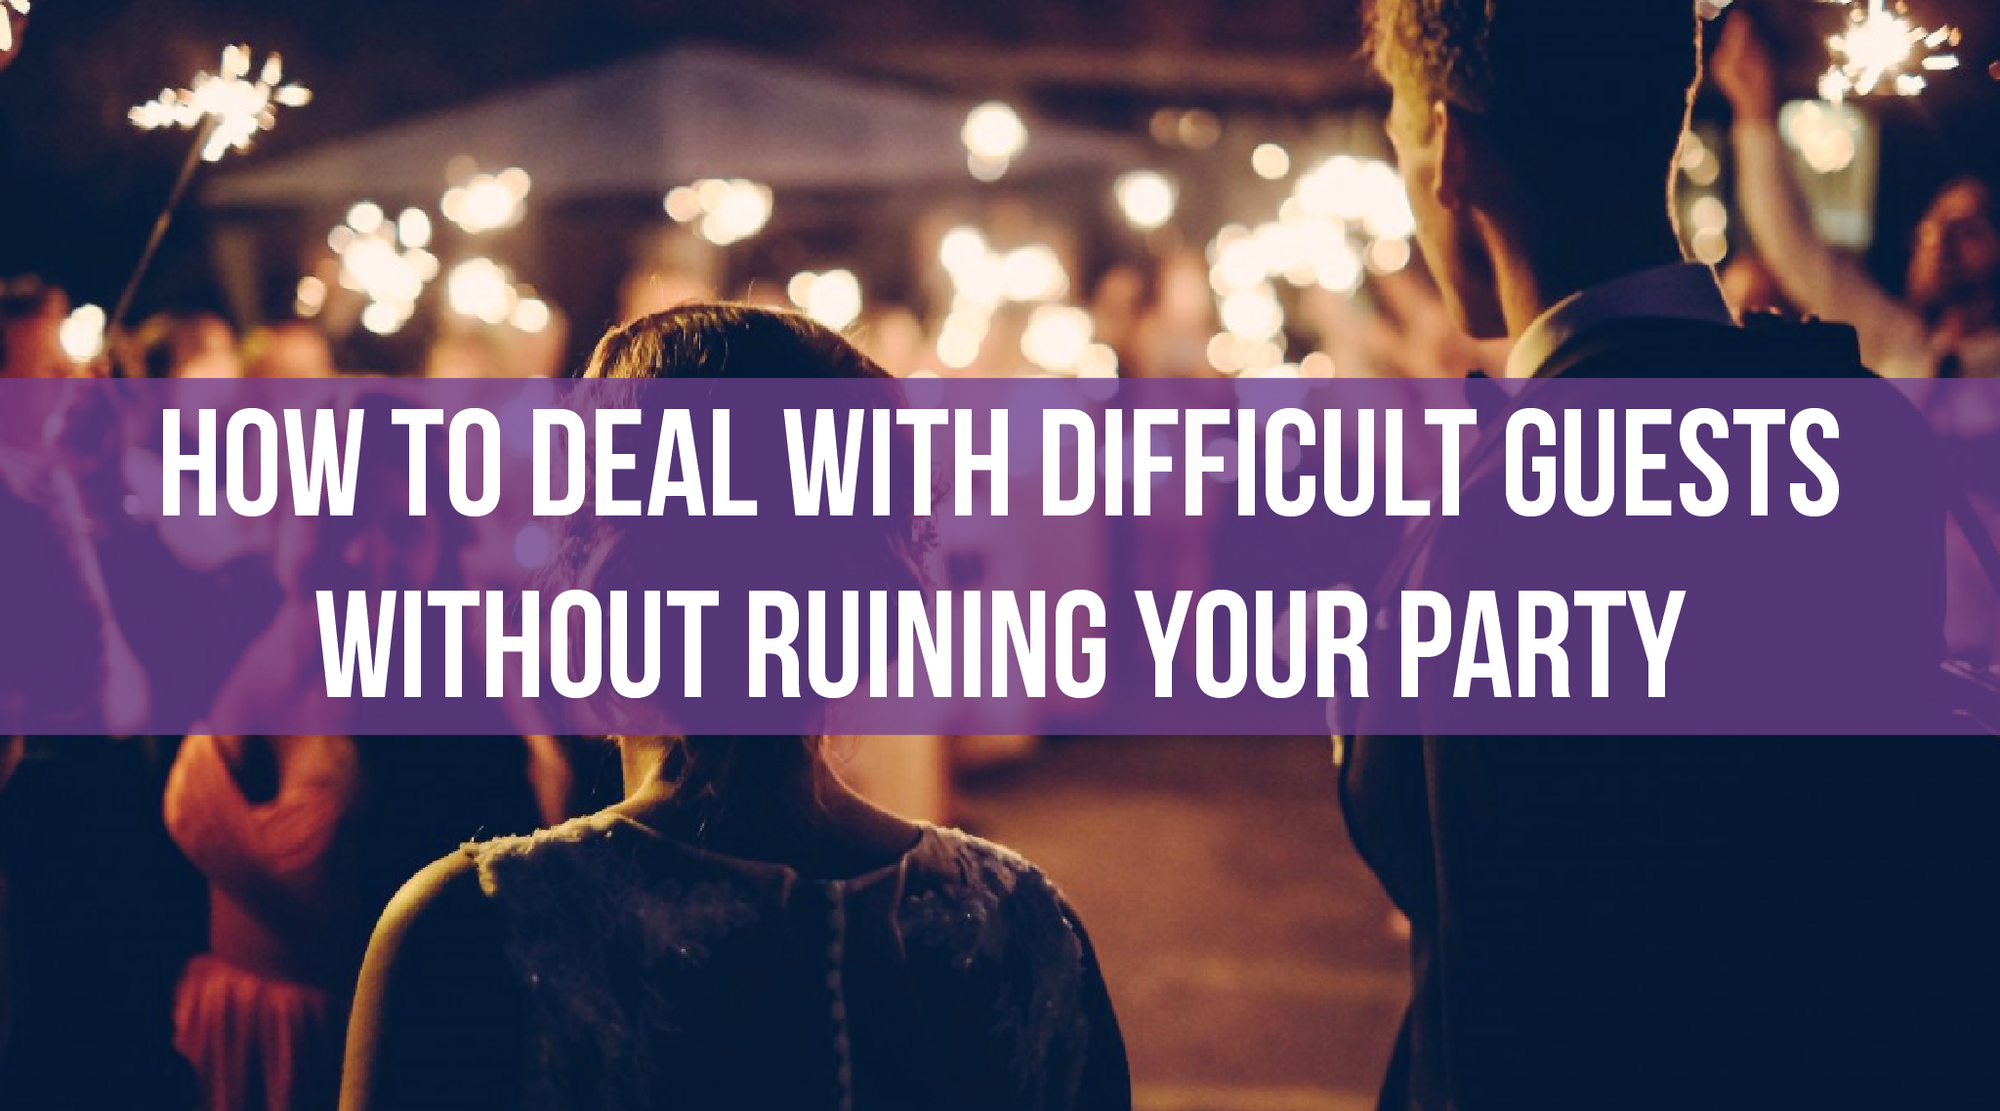 How to Deal with Difficult Guests Without Ruining Your Party